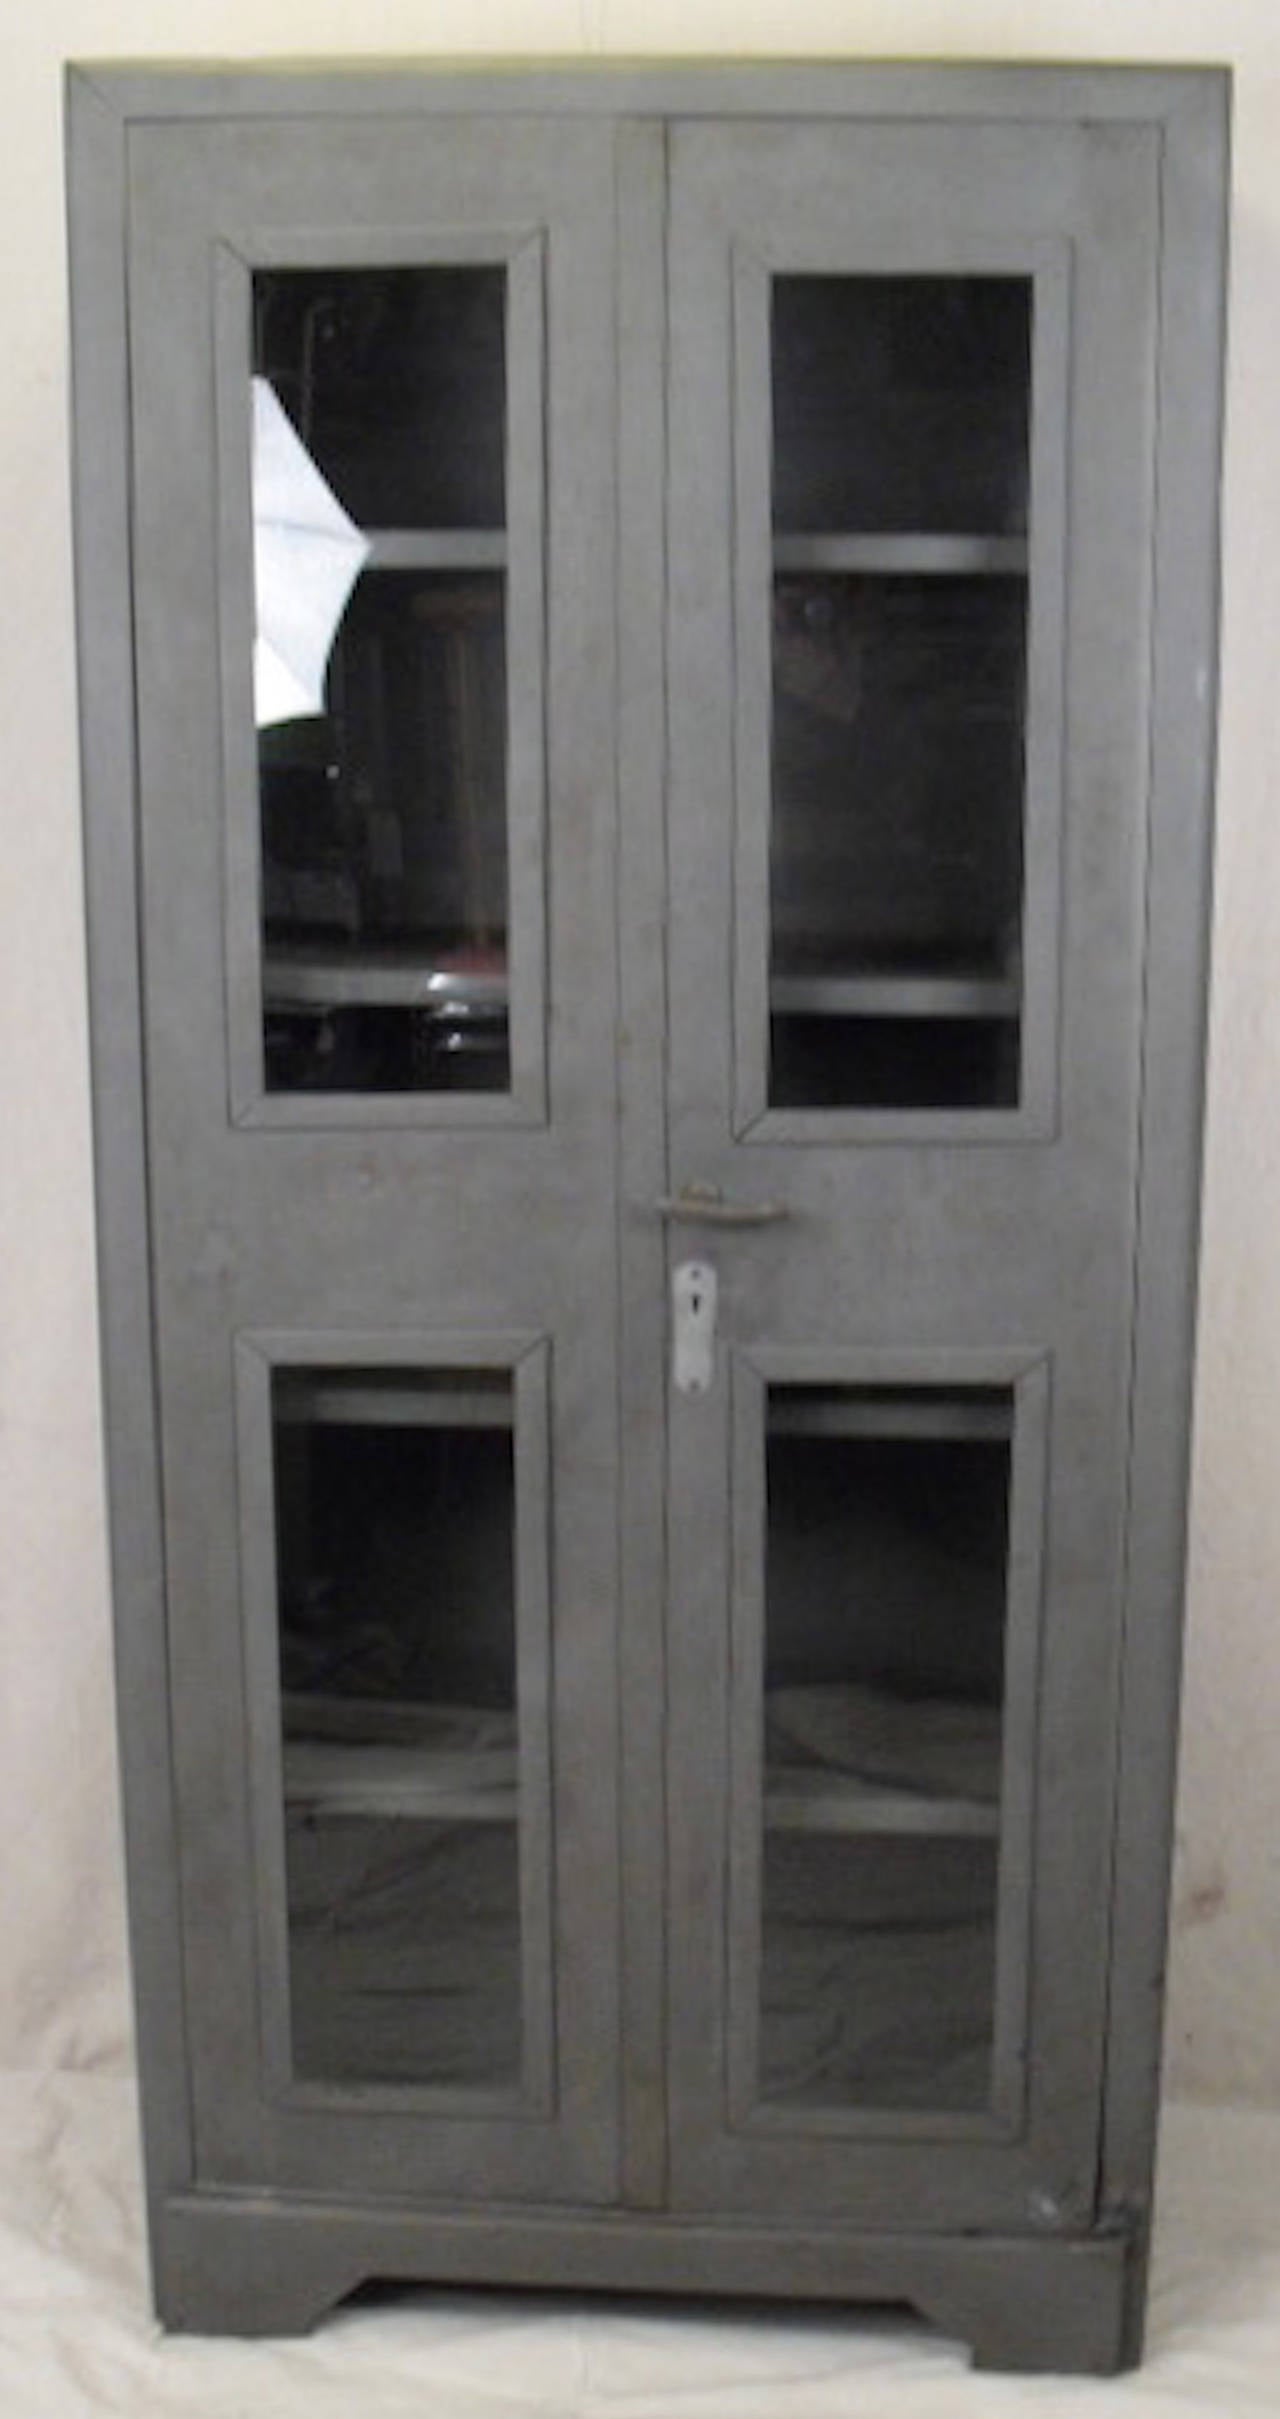 Industrial metal cabinet featuring two large doors with glass windows and four metal shelves. Perfect for use in bathroom or kitchen.

(Please confirm item location - NY or NJ - with dealer)